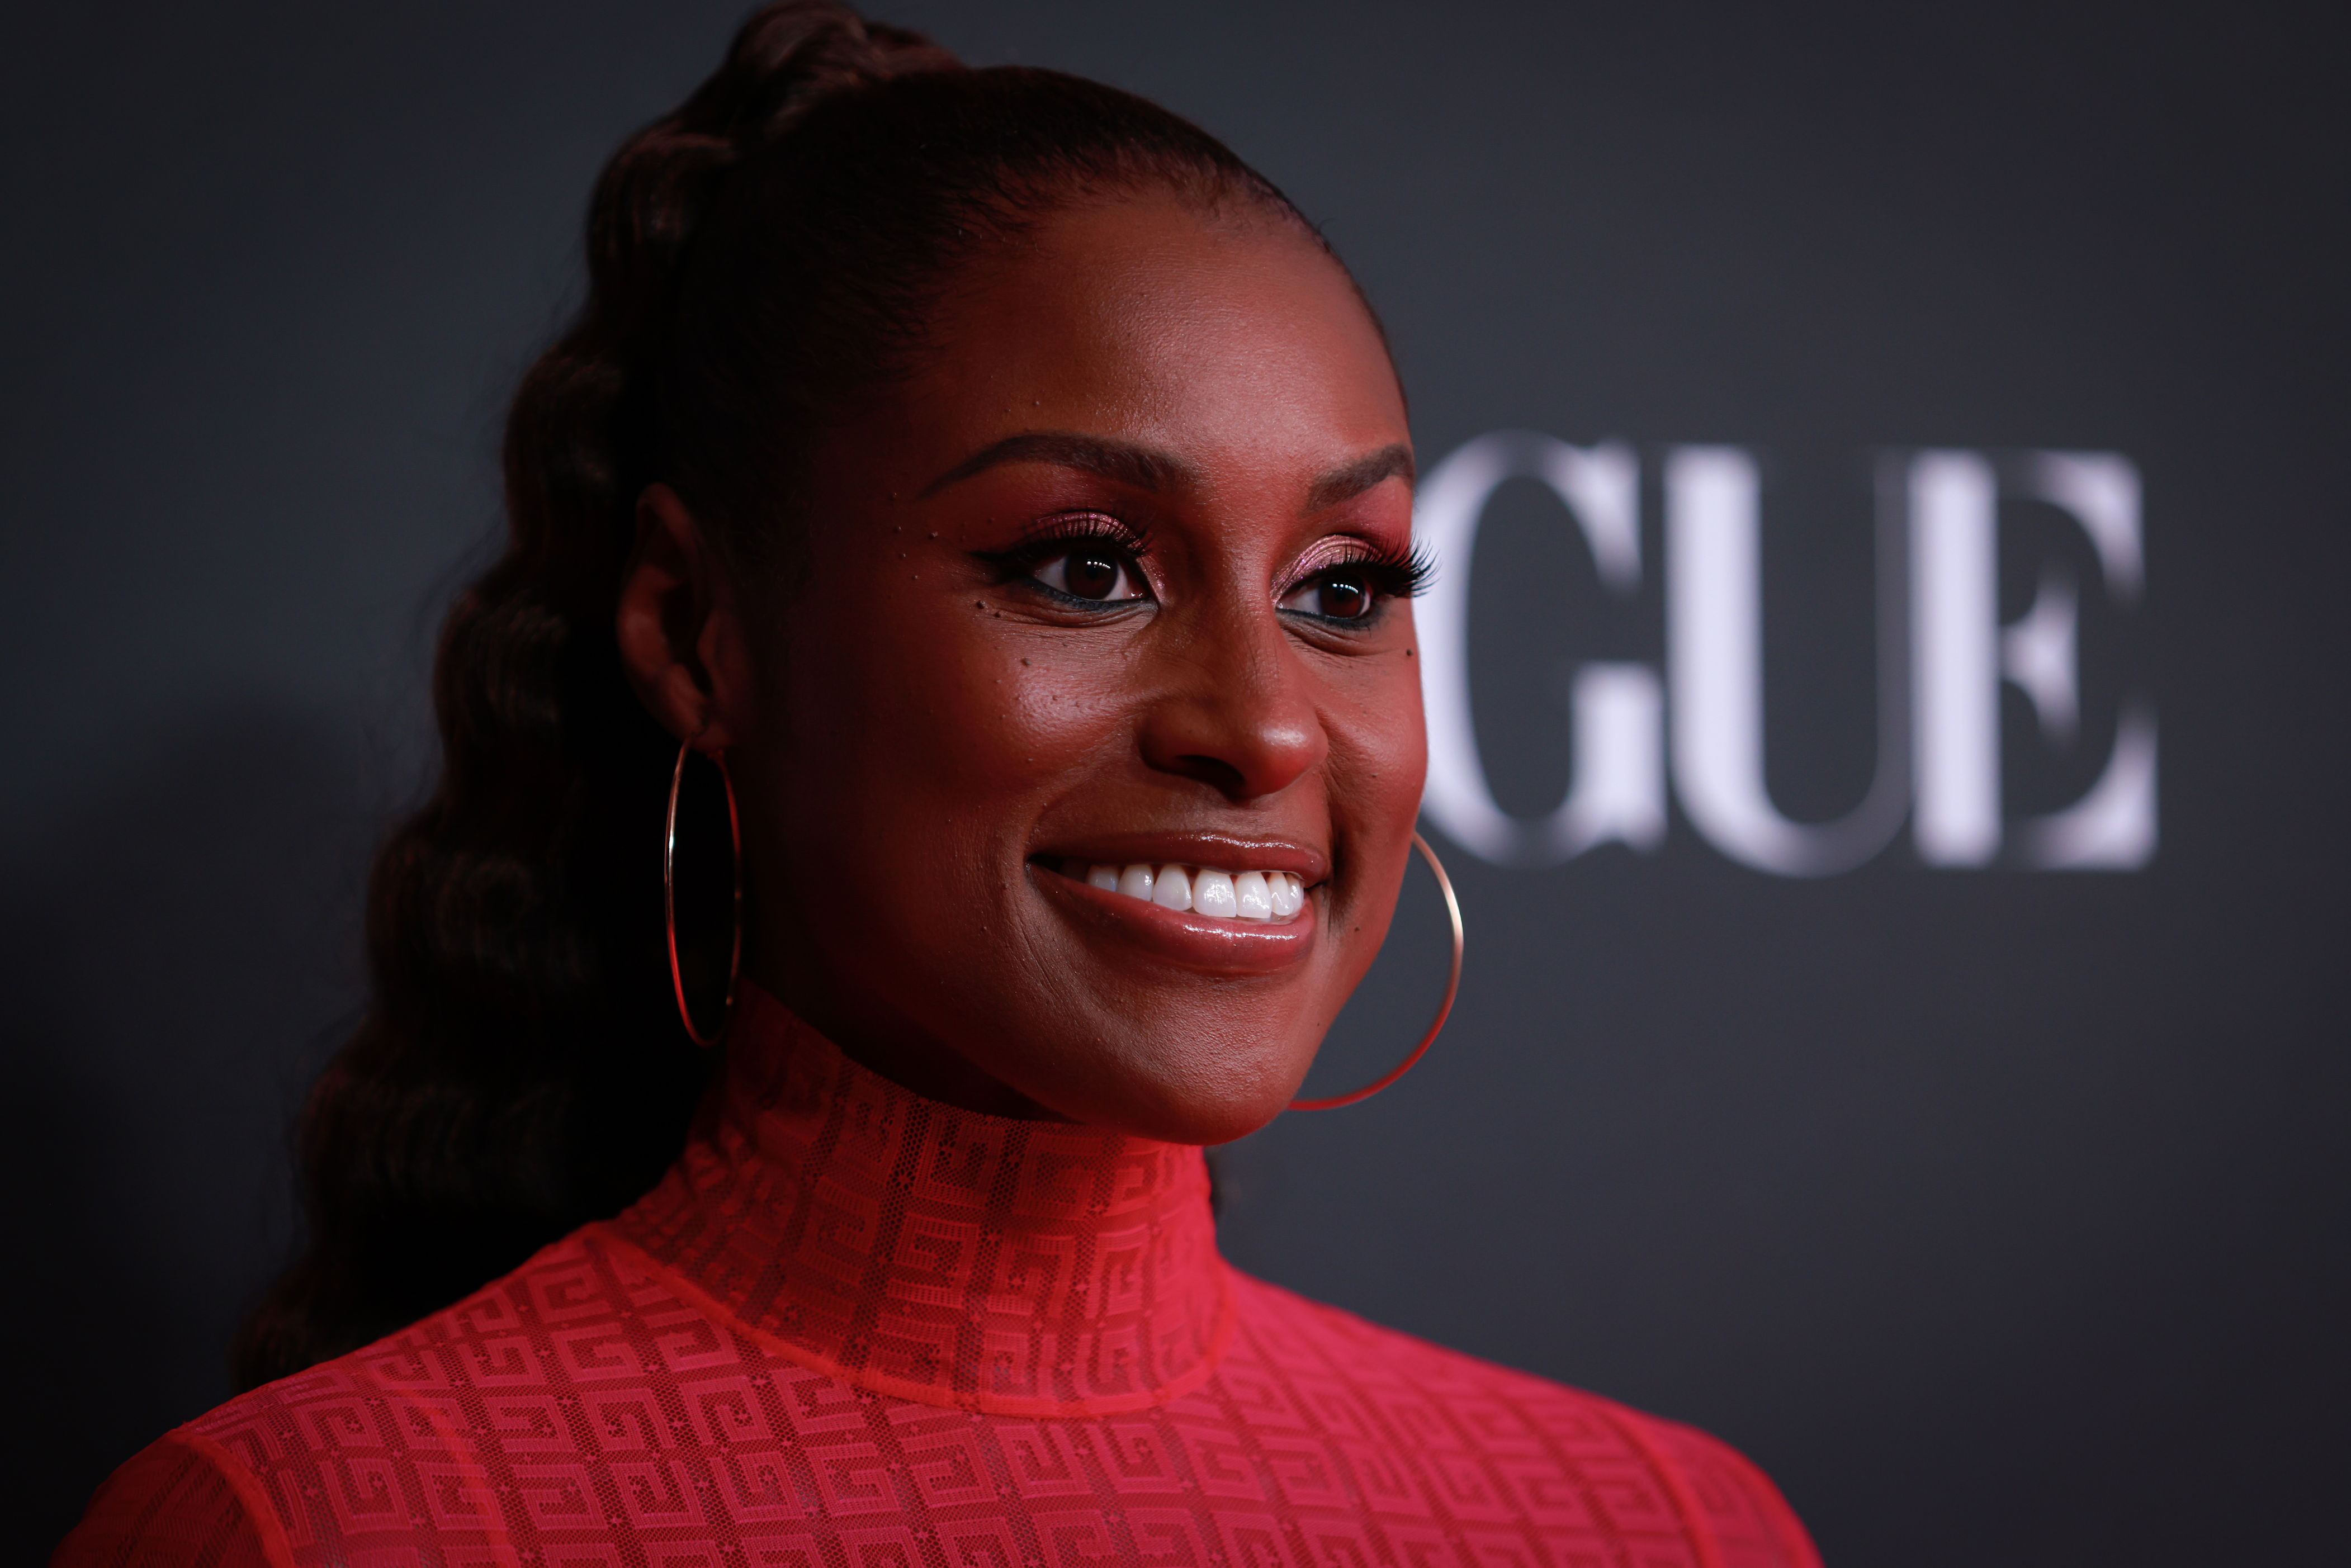 issa rae says hollywood is ‘scared, clueless and at the mercy of wall street' and black stories are ‘less of a priority': ‘there aren't a lot of smart execs anymore'